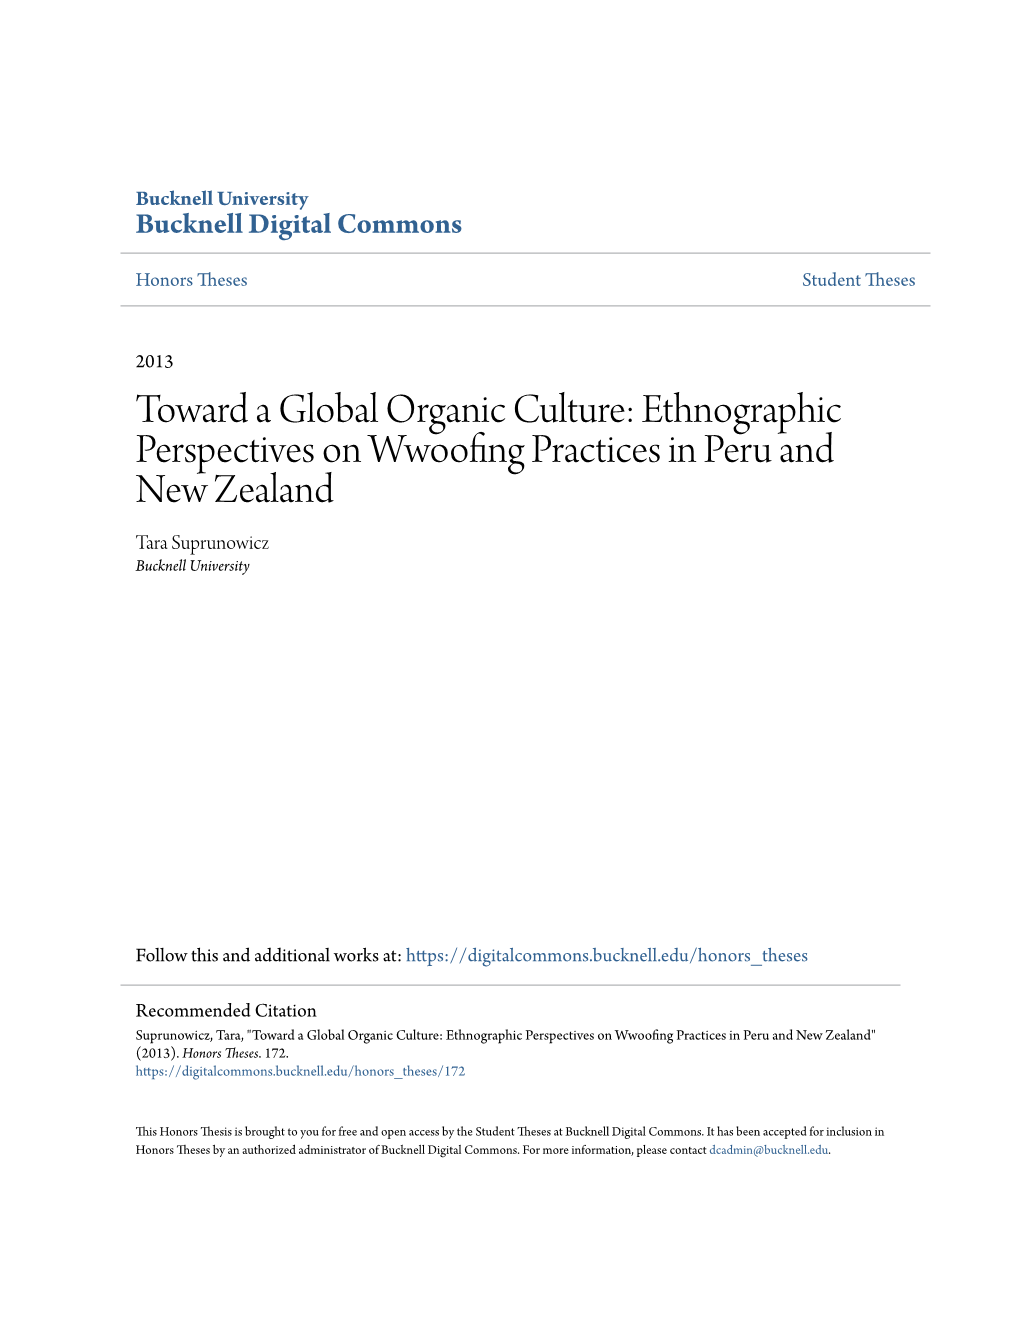 Toward a Global Organic Culture: Ethnographic Perspectives on Wwoofing Practices in Peru and New Zealand Tara Suprunowicz Bucknell University